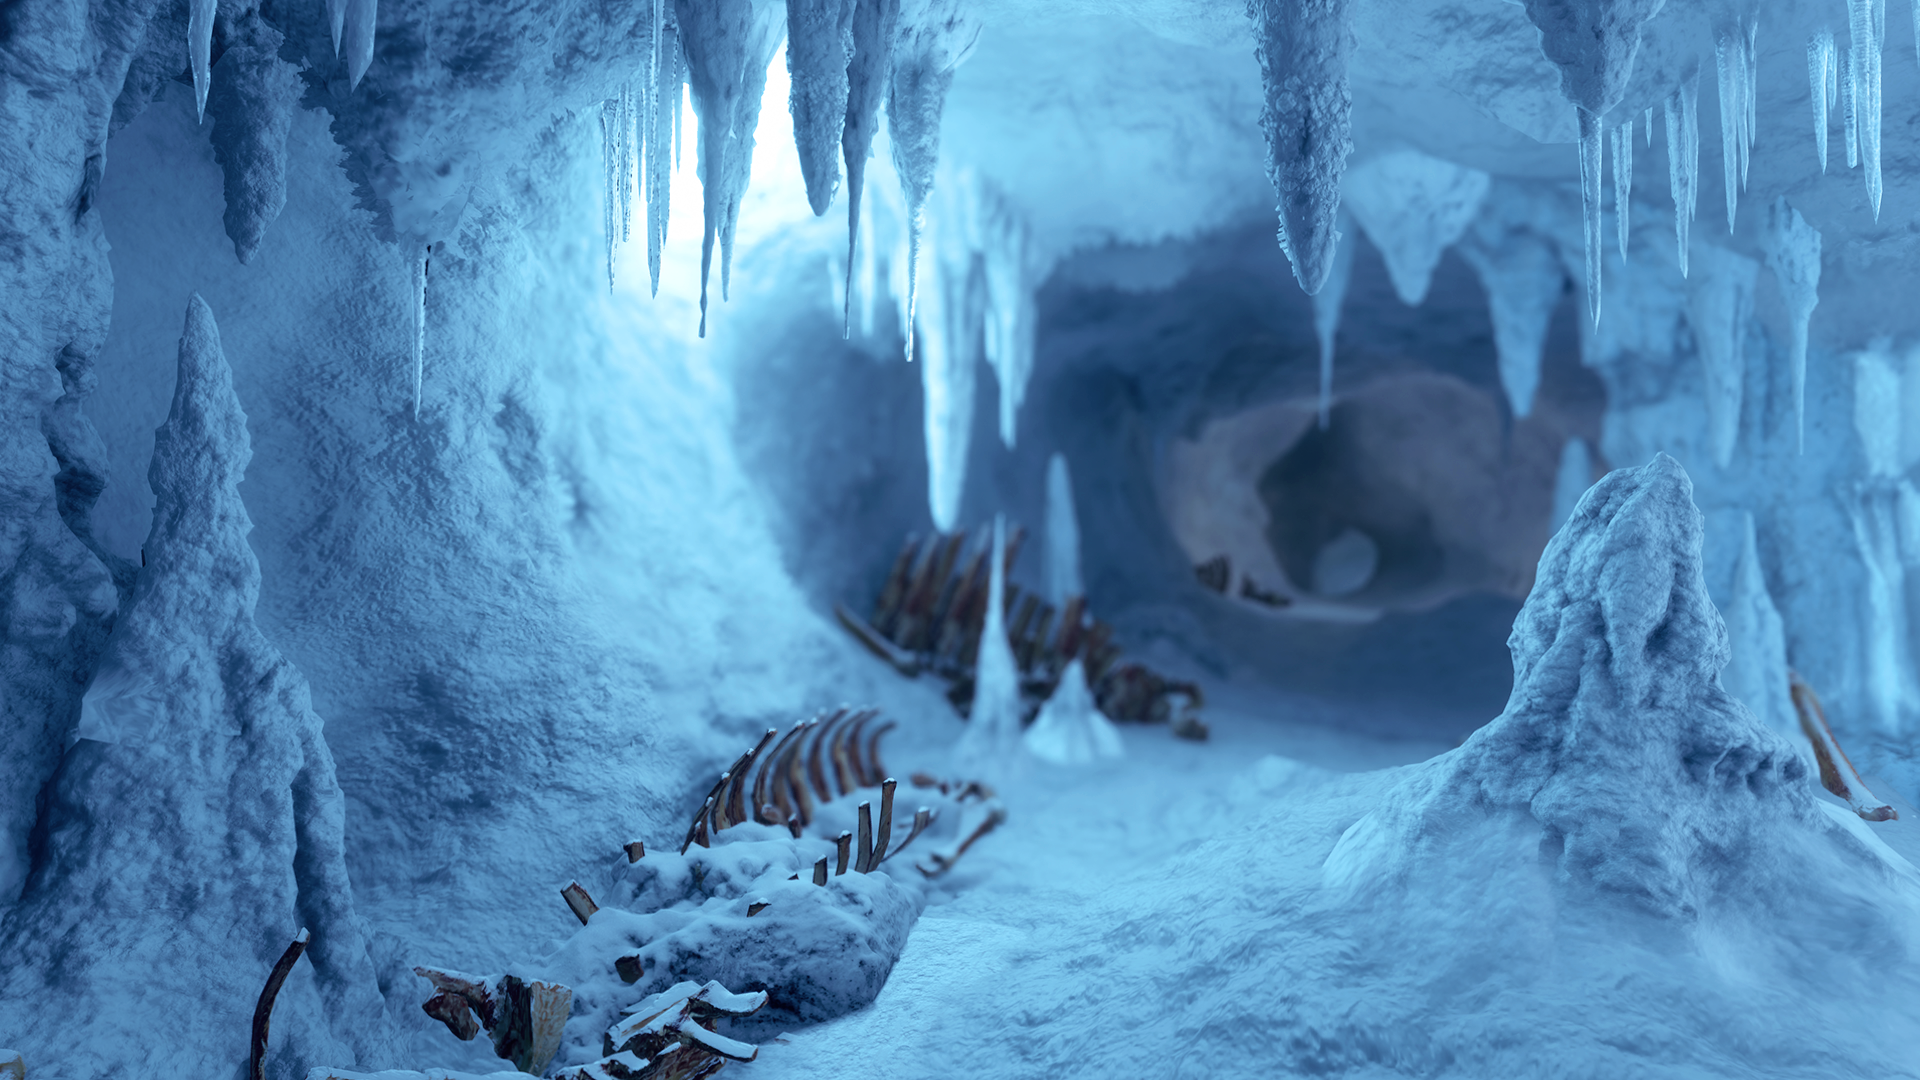 Hoth: Ice Caves | Star Wars Battlefront Wiki | FANDOM powered by Wikia